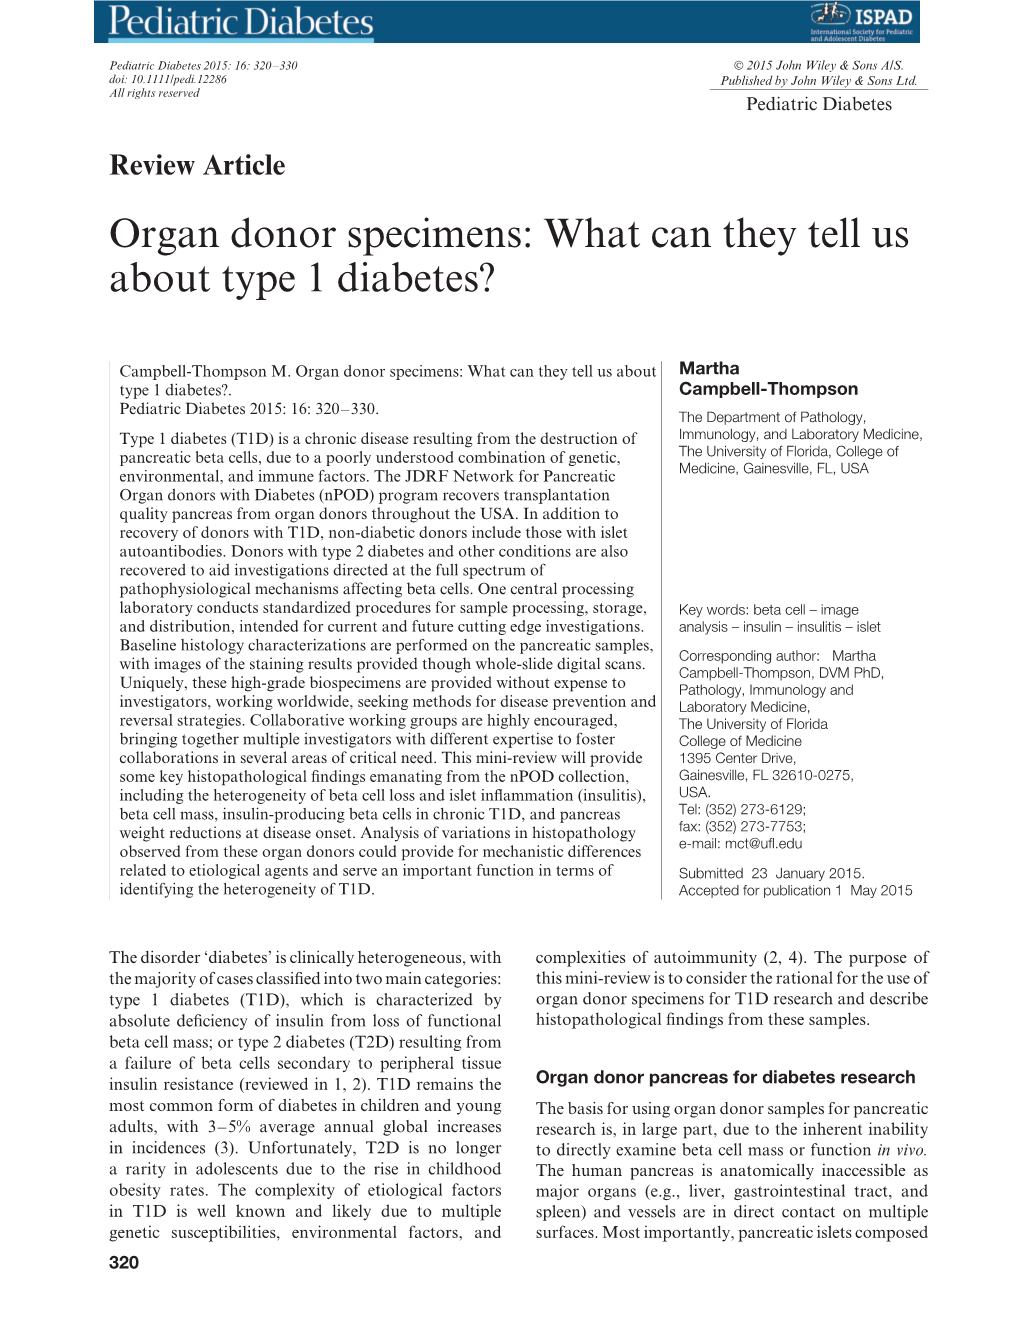 Organ Donor Specimens: What Can They Tell Us About Type 1 Diabetes?